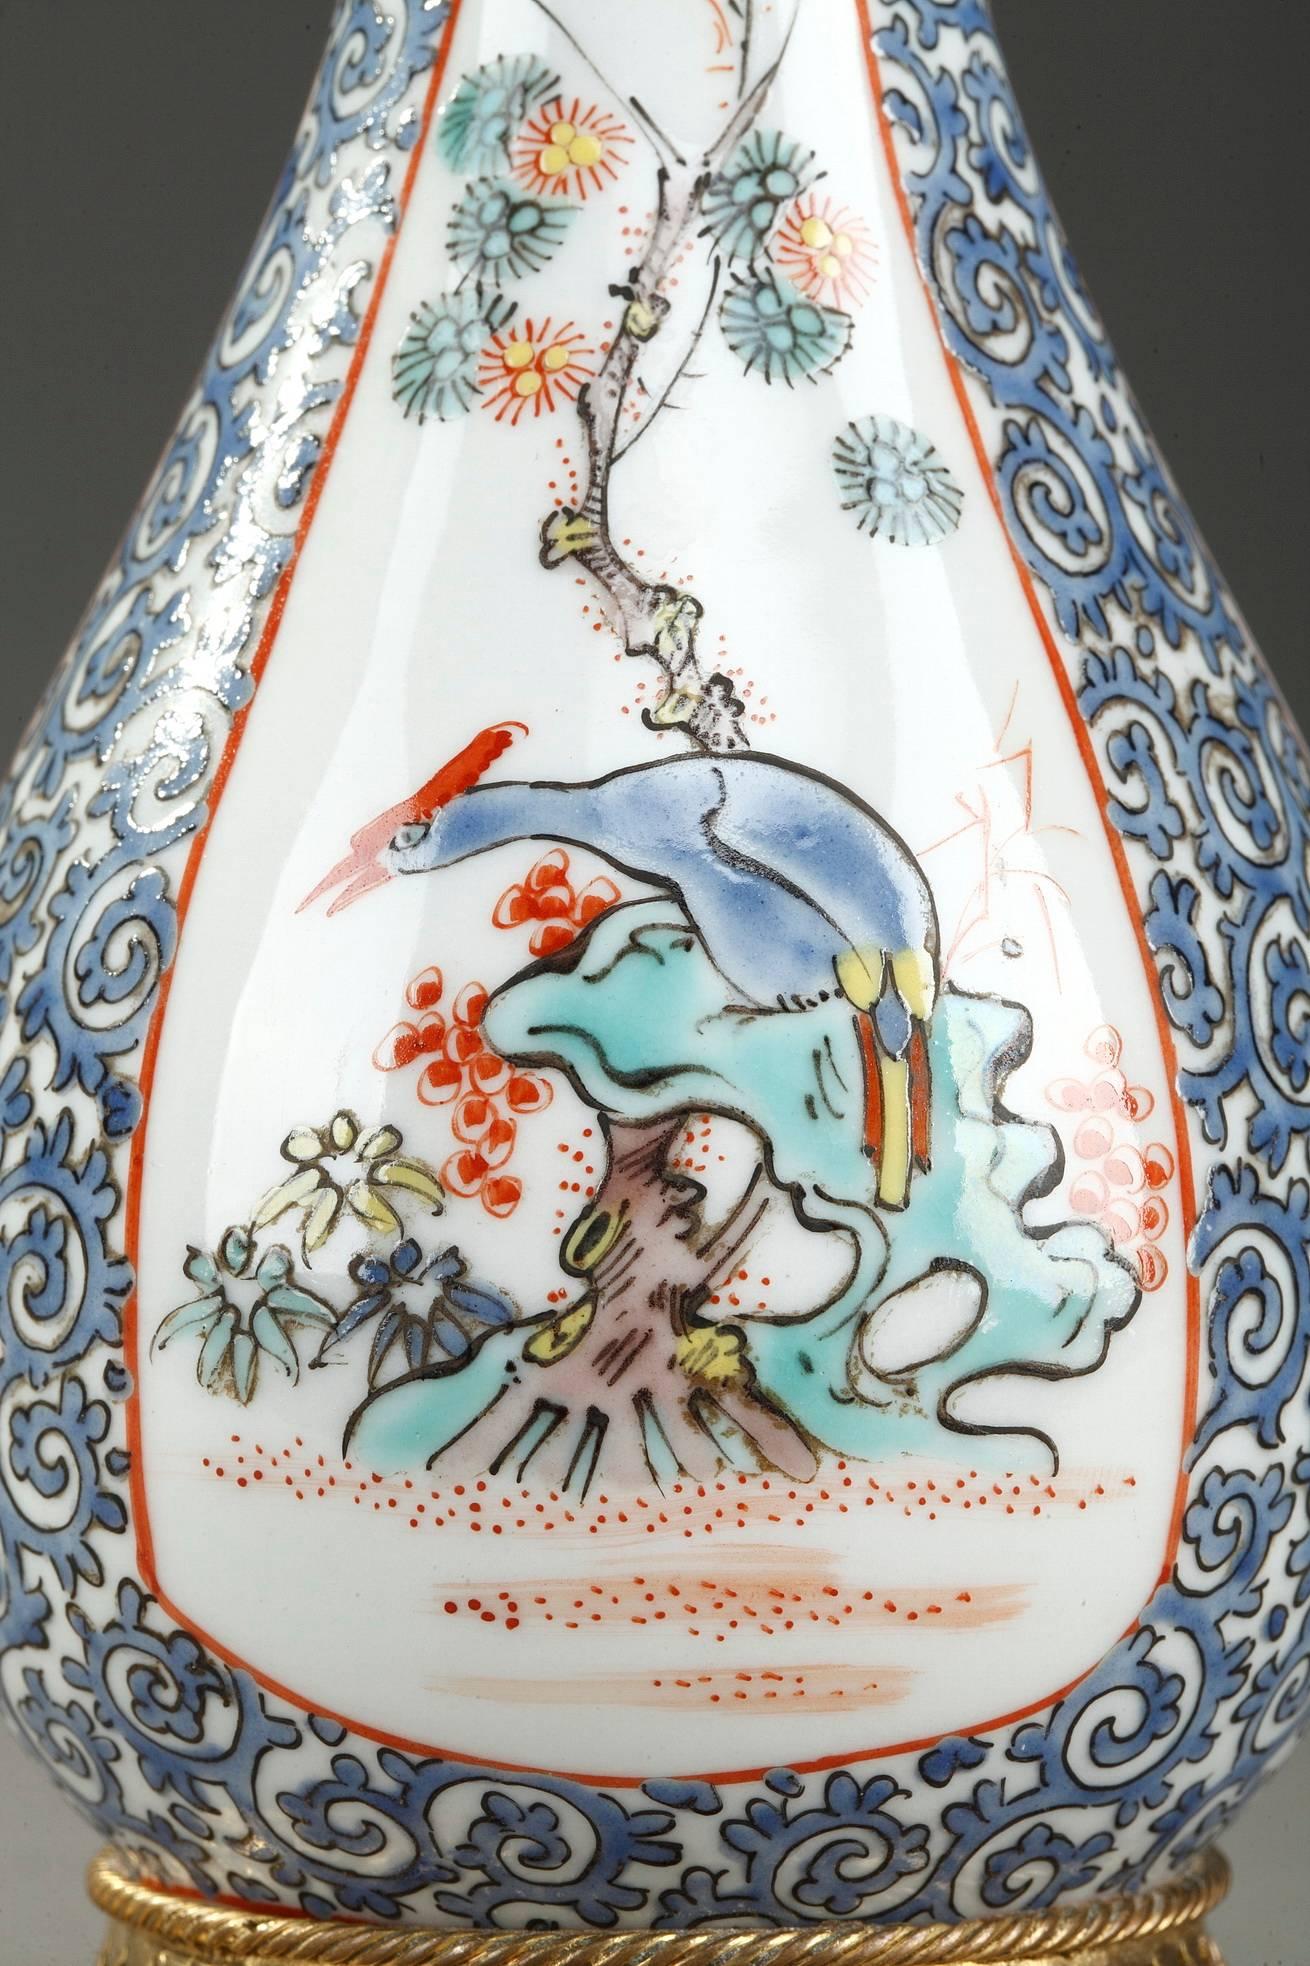 Late 19th century perfume bottle and opium flacon crafted of porcelain and multicolored enamels, with gilt and chiseled bronze pierced mounts. It displays a beautiful decor in Chinese style composed of birds and branches on foliated rinceau